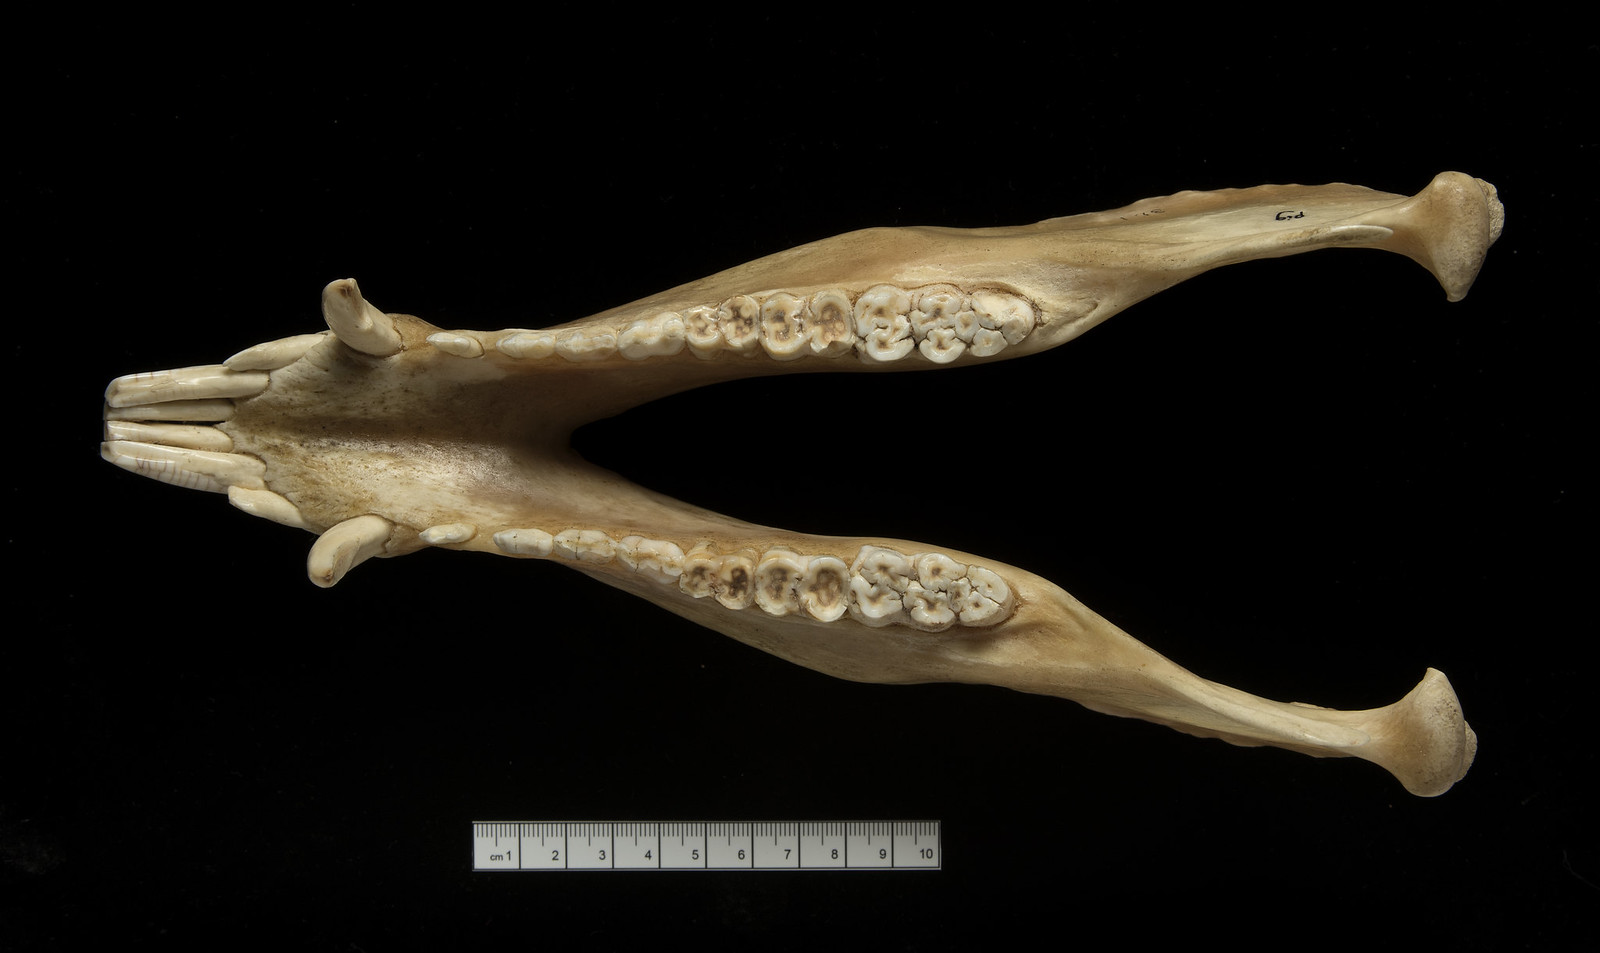 Picture of a pig jaw. The pre-molars and molar teeth show some similarity to human teeth